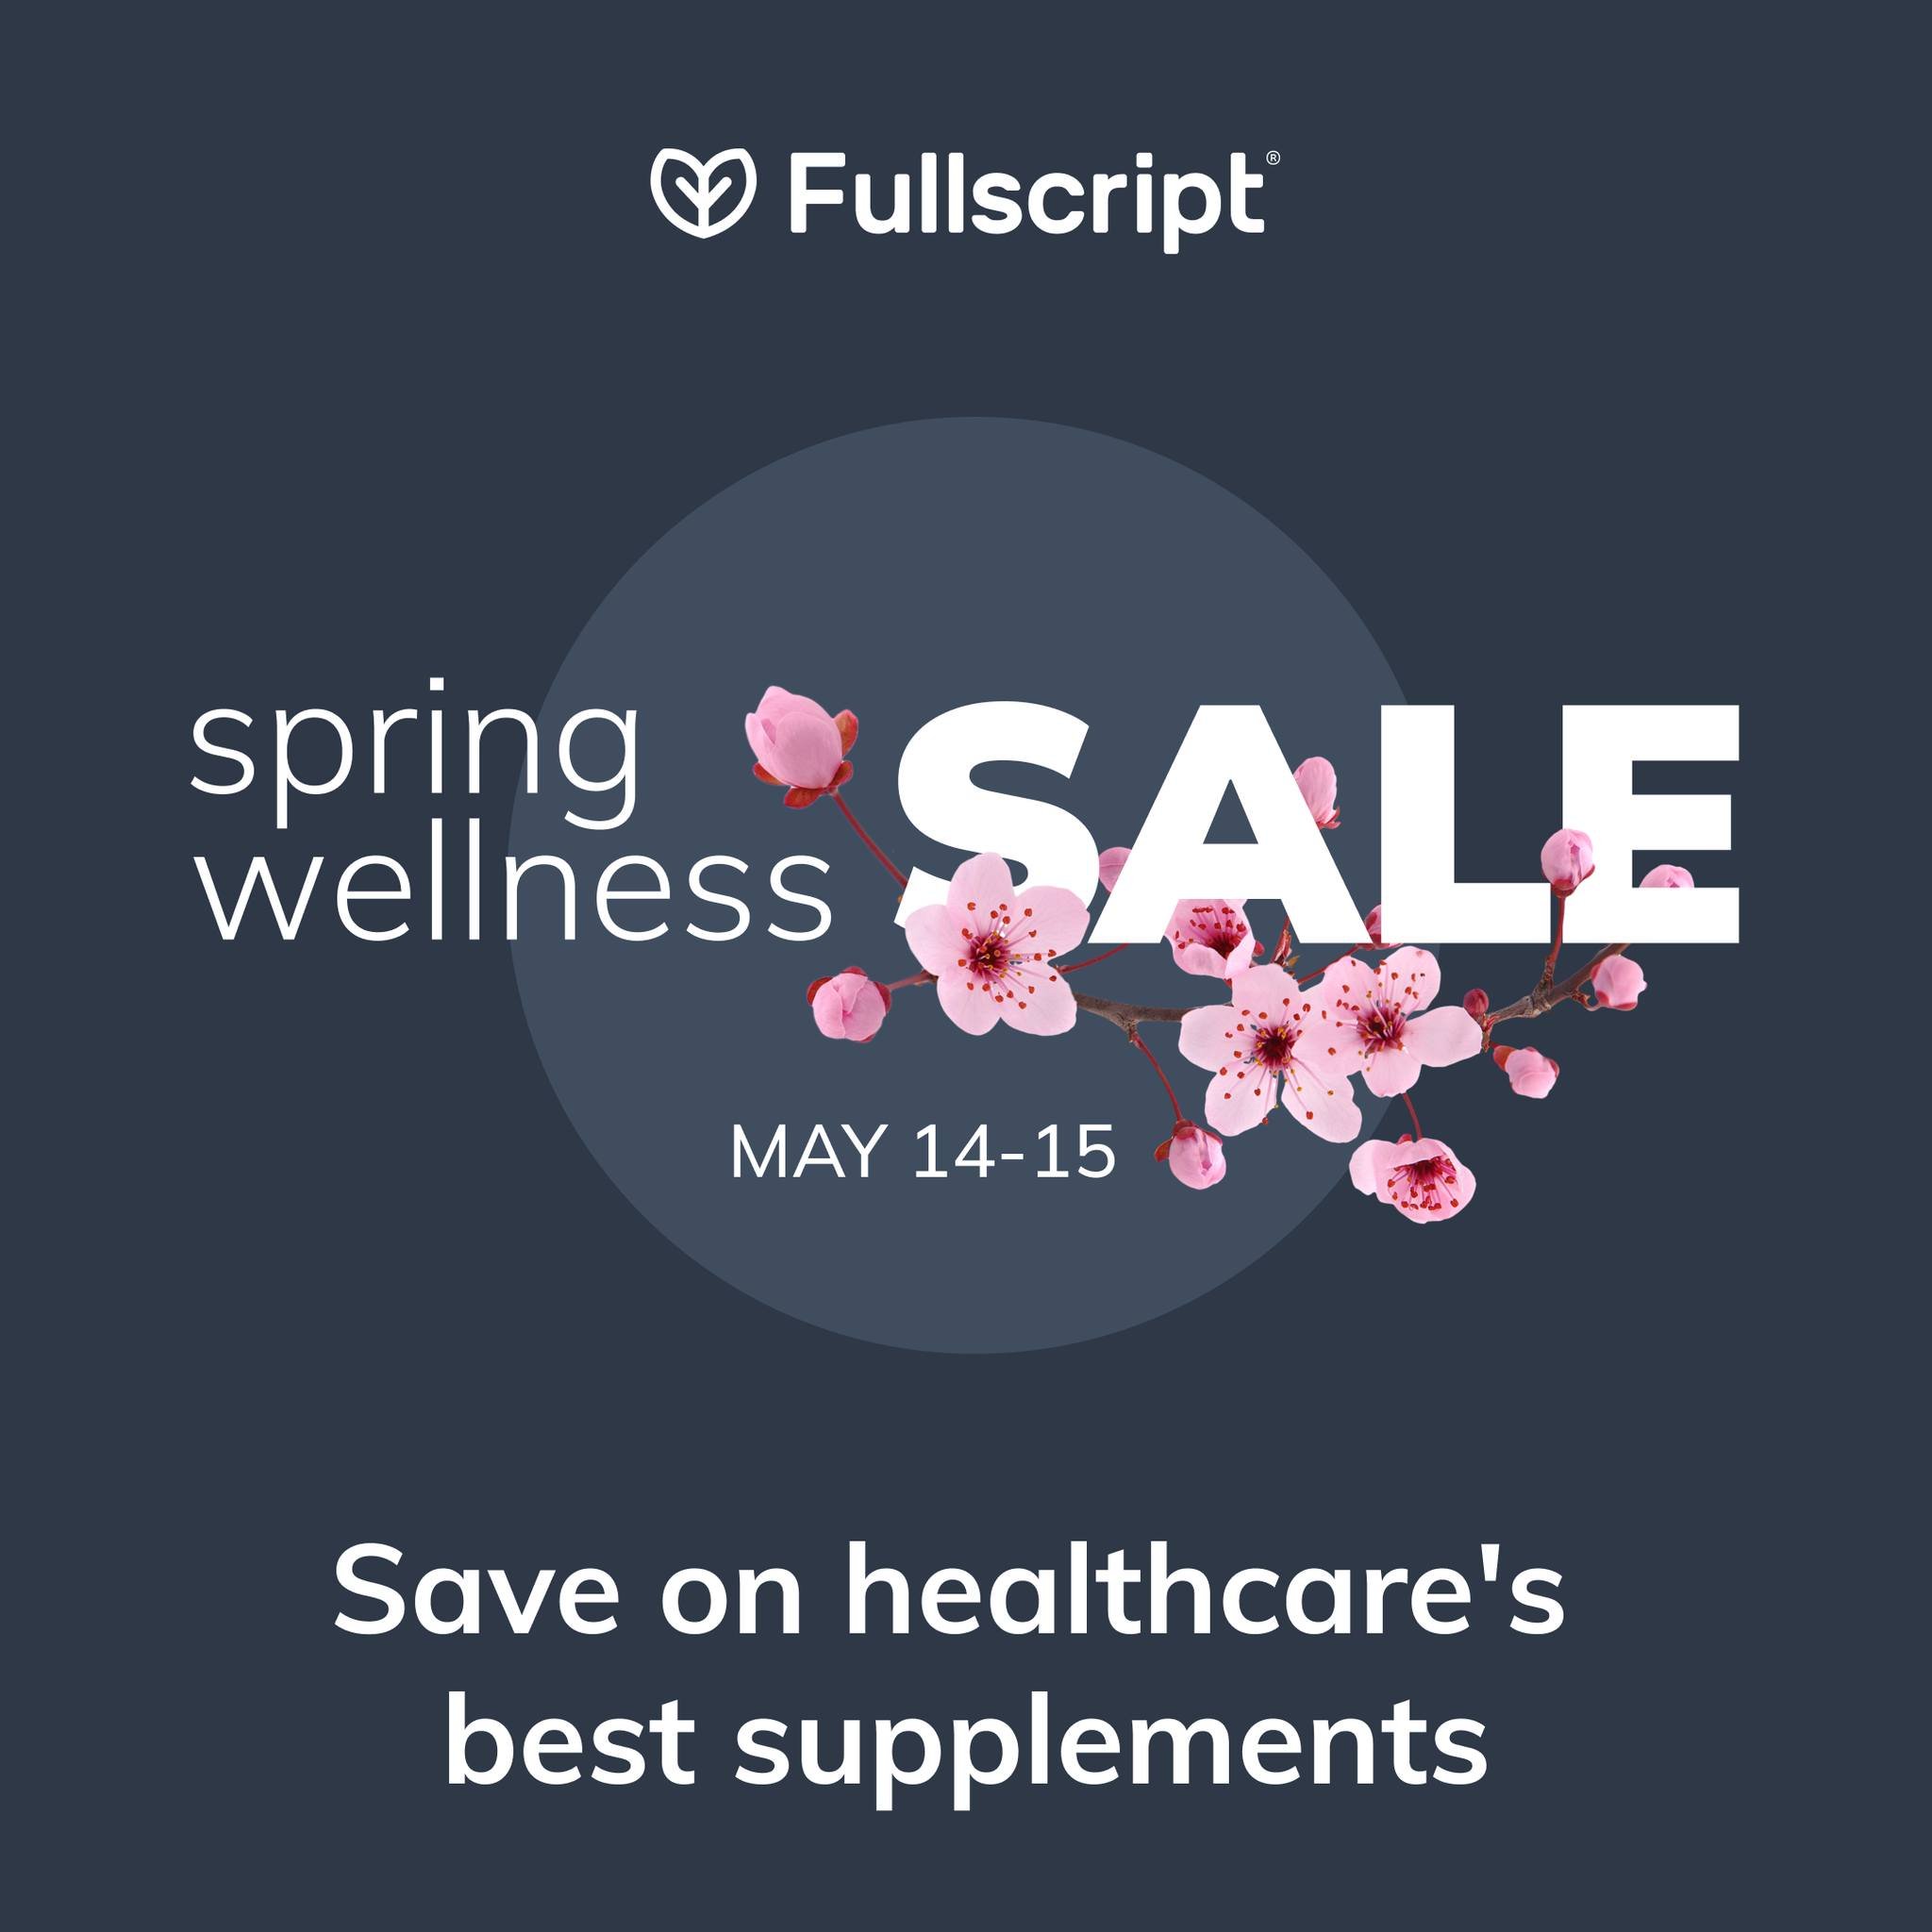 Our Spring Wellness Sale starts tomorrow for two days only! Make sure you're signed up for our Fullscript online dispensary to save on high quality products or contact the office if you would like to join! Fullscript ships fast, stocks trusted produc